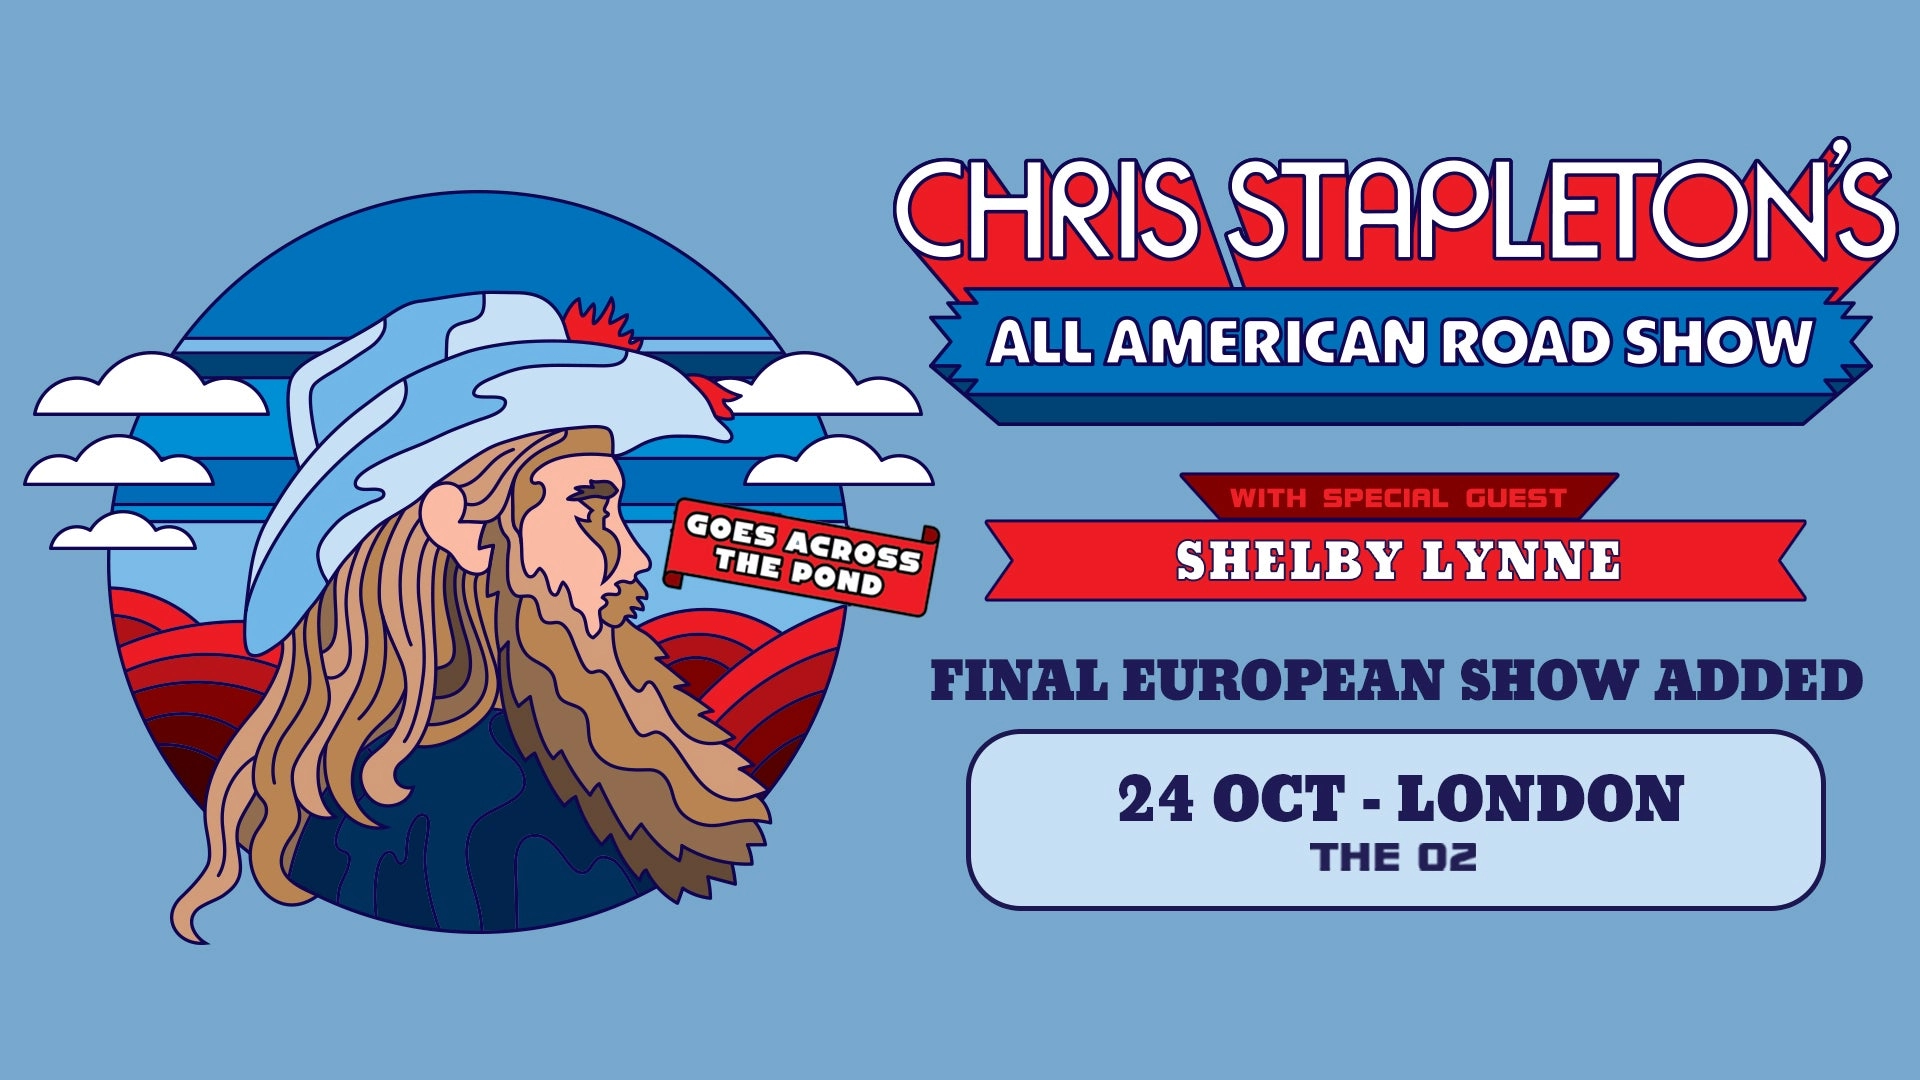 Chris Stapleton's All-american Road Show Goes Across The Pond en The O2 Arena Tickets